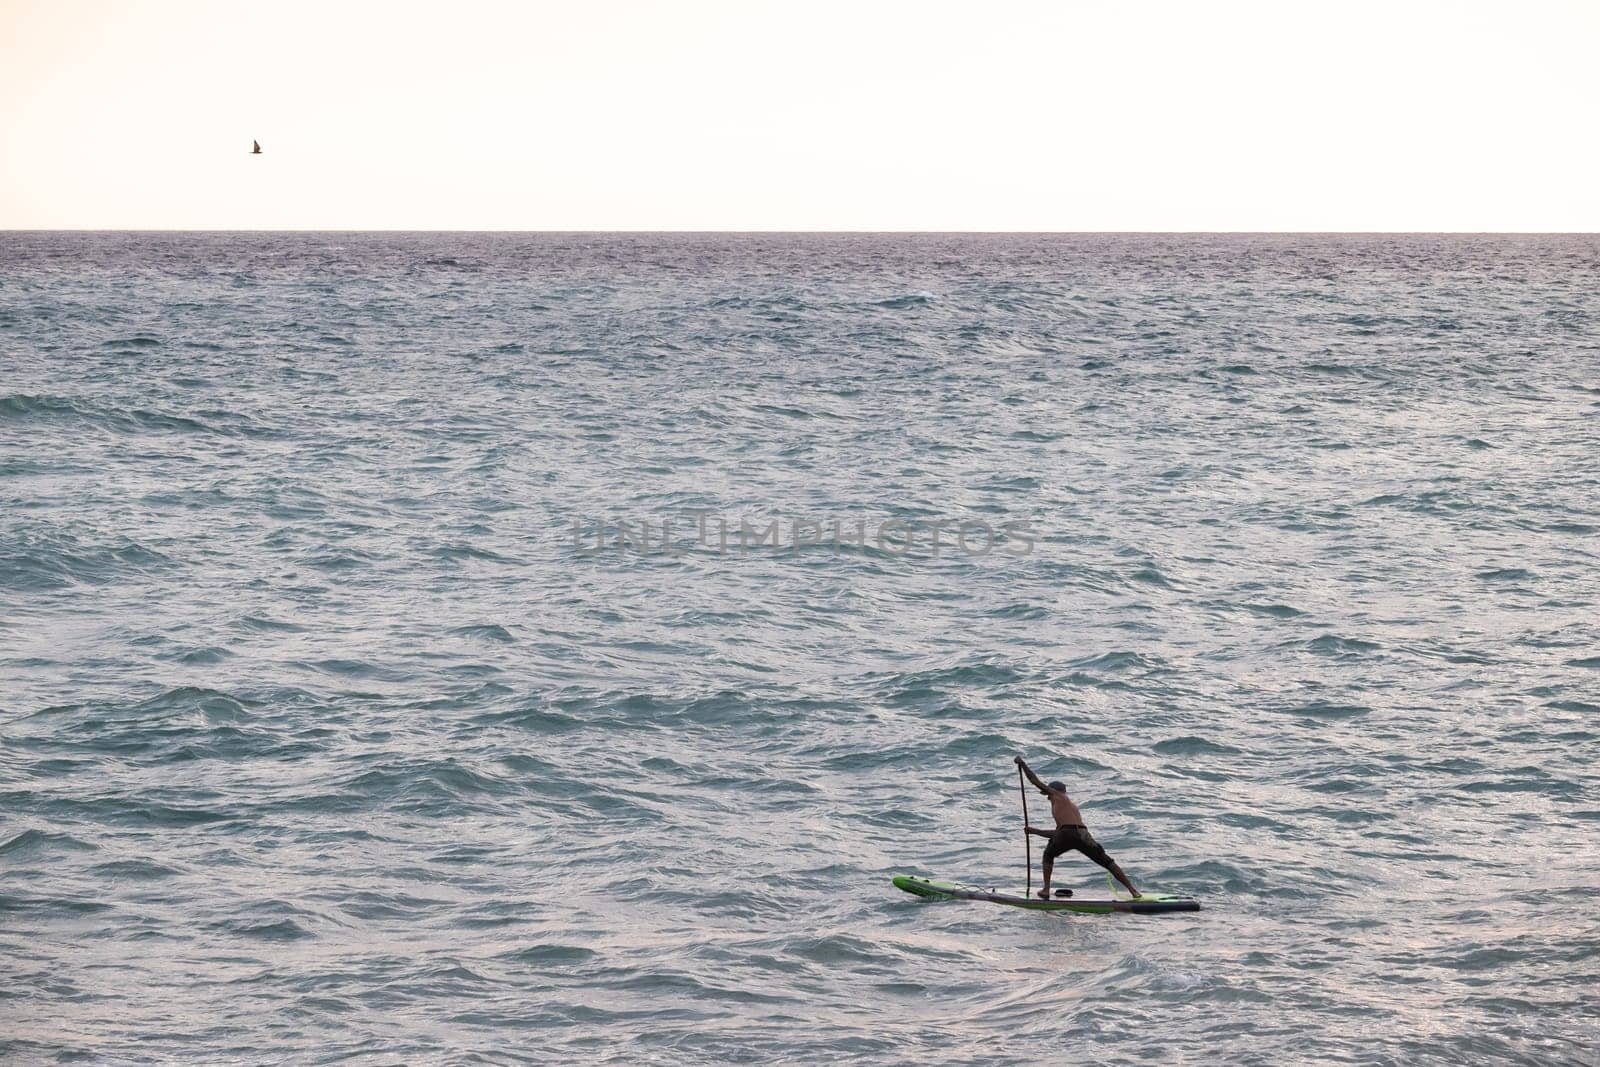 athletic wiry surfer guy swims with a paddle on a sup board in the sea Stand up paddleboarding by Rotozey